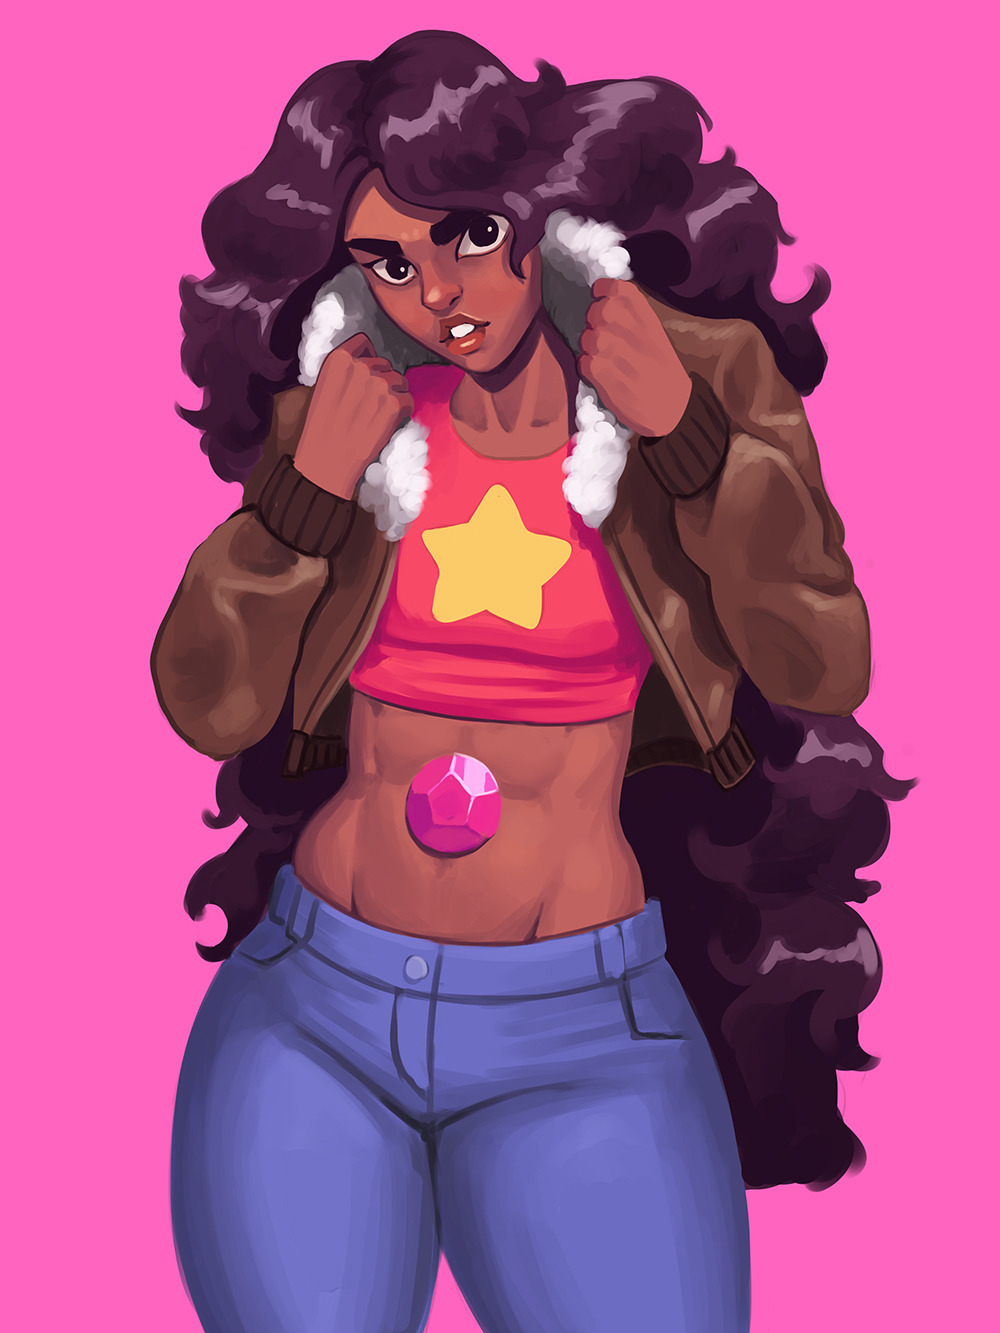 bickpen:  When I drew Stevonnie in a jacket earlier I was unaware that they had worn